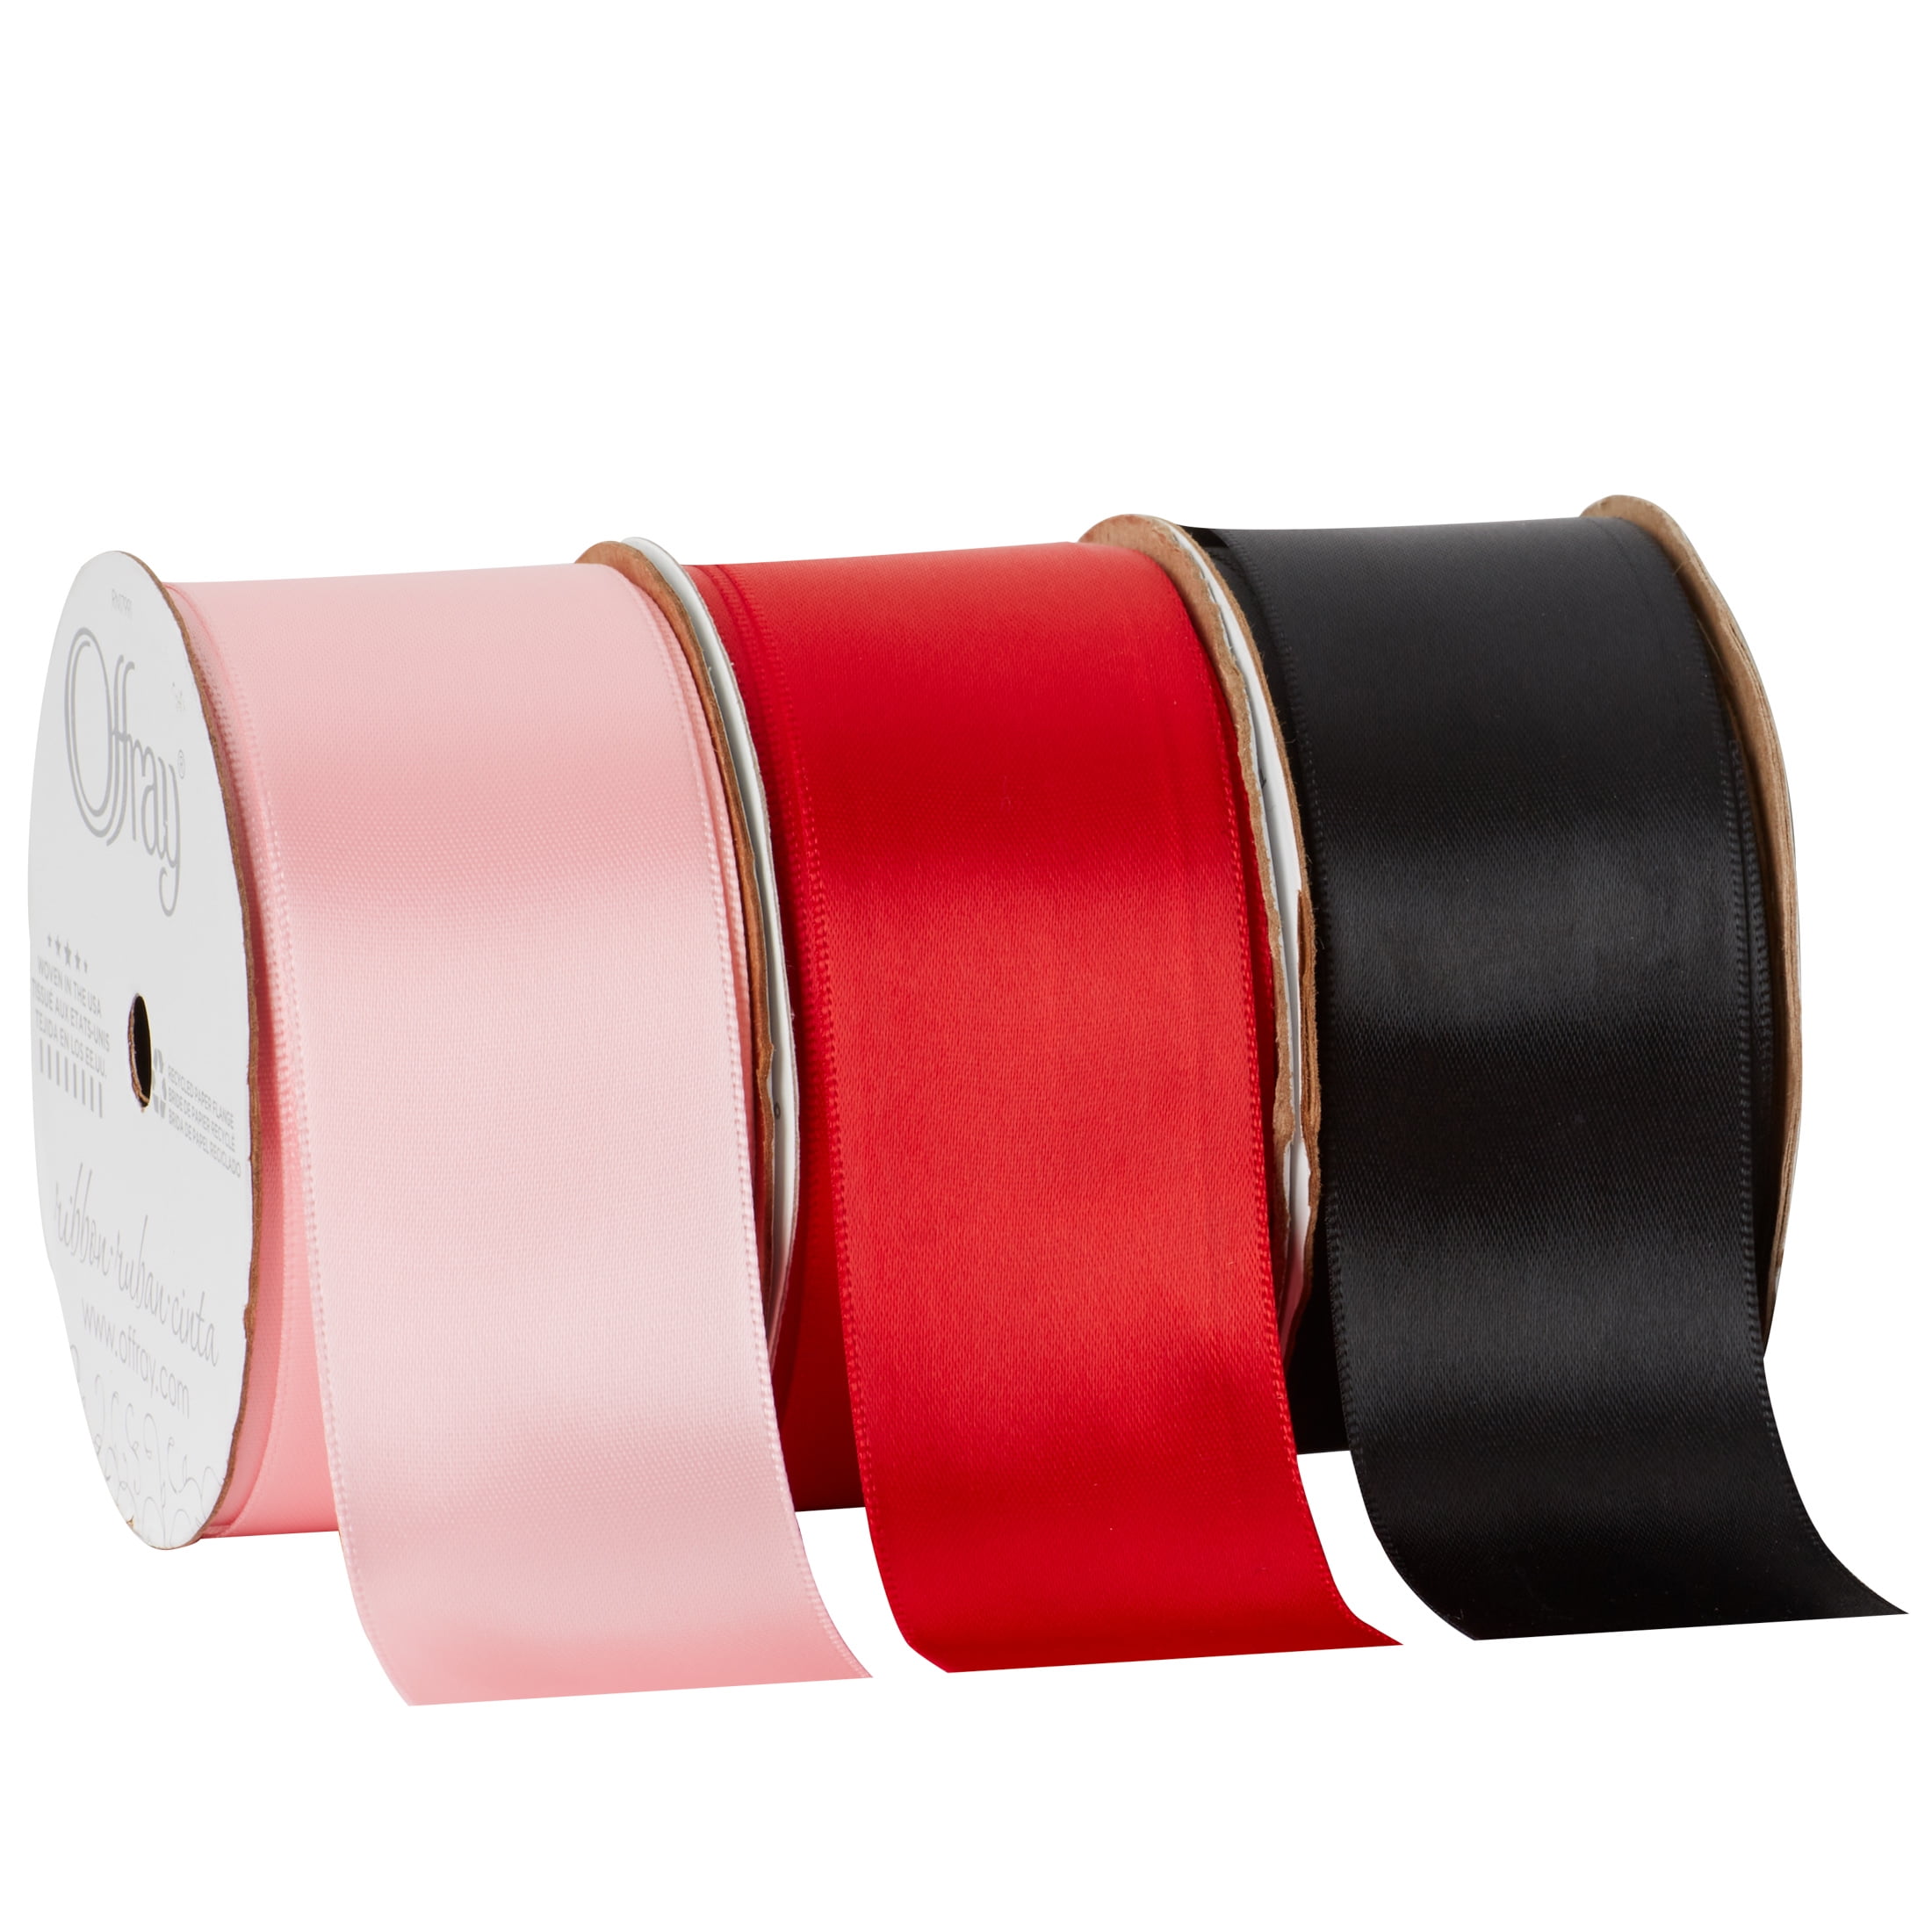 Wholesale Hot Pink Offray Double Faced Satin Ribbon